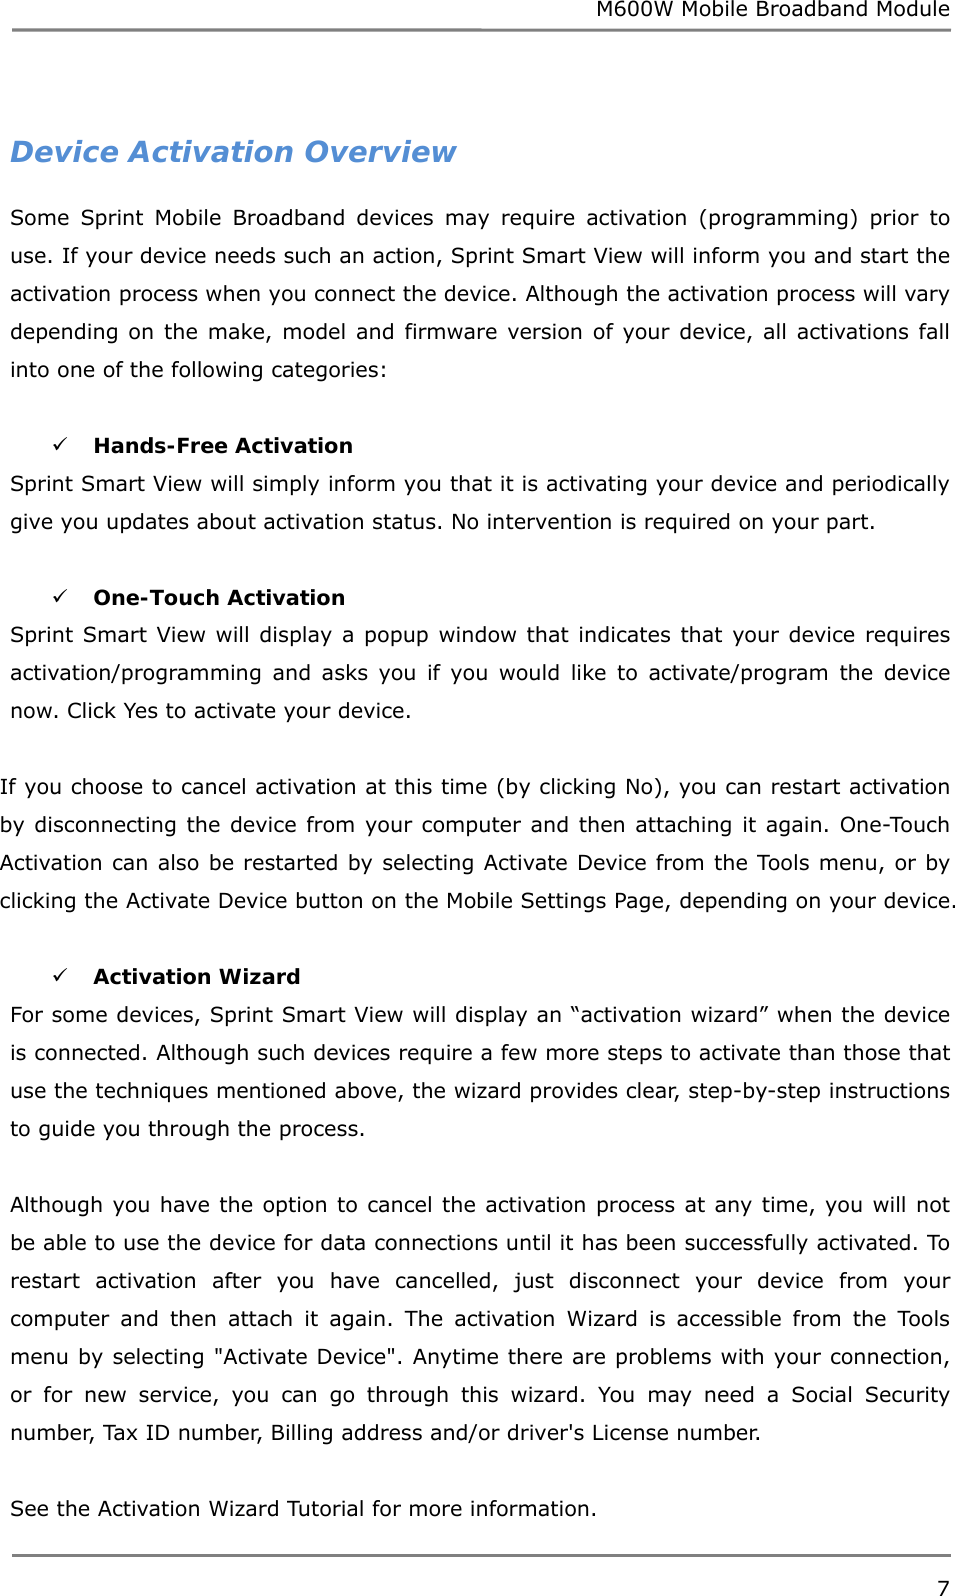 M600W Mobile Broadband Module 7   Device Activation Overview Some Sprint Mobile Broadband devices may require activation (programming) prior to use. If your device needs such an action, Sprint Smart View will inform you and start the activation process when you connect the device. Although the activation process will vary depending on the make, model and firmware version of your device, all activations fall into one of the following categories:   Hands-Free Activation  Sprint Smart View will simply inform you that it is activating your device and periodically give you updates about activation status. No intervention is required on your part.   One-Touch Activation  Sprint Smart View will display a popup window that indicates that your device requires activation/programming and asks you if you would like to activate/program the device now. Click Yes to activate your device.  If you choose to cancel activation at this time (by clicking No), you can restart activation by disconnecting the device from your computer and then attaching it again. One-Touch Activation can also be restarted by selecting Activate Device from the Tools menu, or by clicking the Activate Device button on the Mobile Settings Page, depending on your device.   Activation Wizard For some devices, Sprint Smart View will display an “activation wizard” when the device is connected. Although such devices require a few more steps to activate than those that use the techniques mentioned above, the wizard provides clear, step-by-step instructions to guide you through the process.  Although you have the option to cancel the activation process at any time, you will not be able to use the device for data connections until it has been successfully activated. To restart activation after you have cancelled, just disconnect your device from your computer and then attach it again. The activation Wizard is accessible from the Tools menu by selecting &quot;Activate Device&quot;. Anytime there are problems with your connection, or for new service, you can go through this wizard. You may need a Social Security number, Tax ID number, Billing address and/or driver&apos;s License number.  See the Activation Wizard Tutorial for more information. 